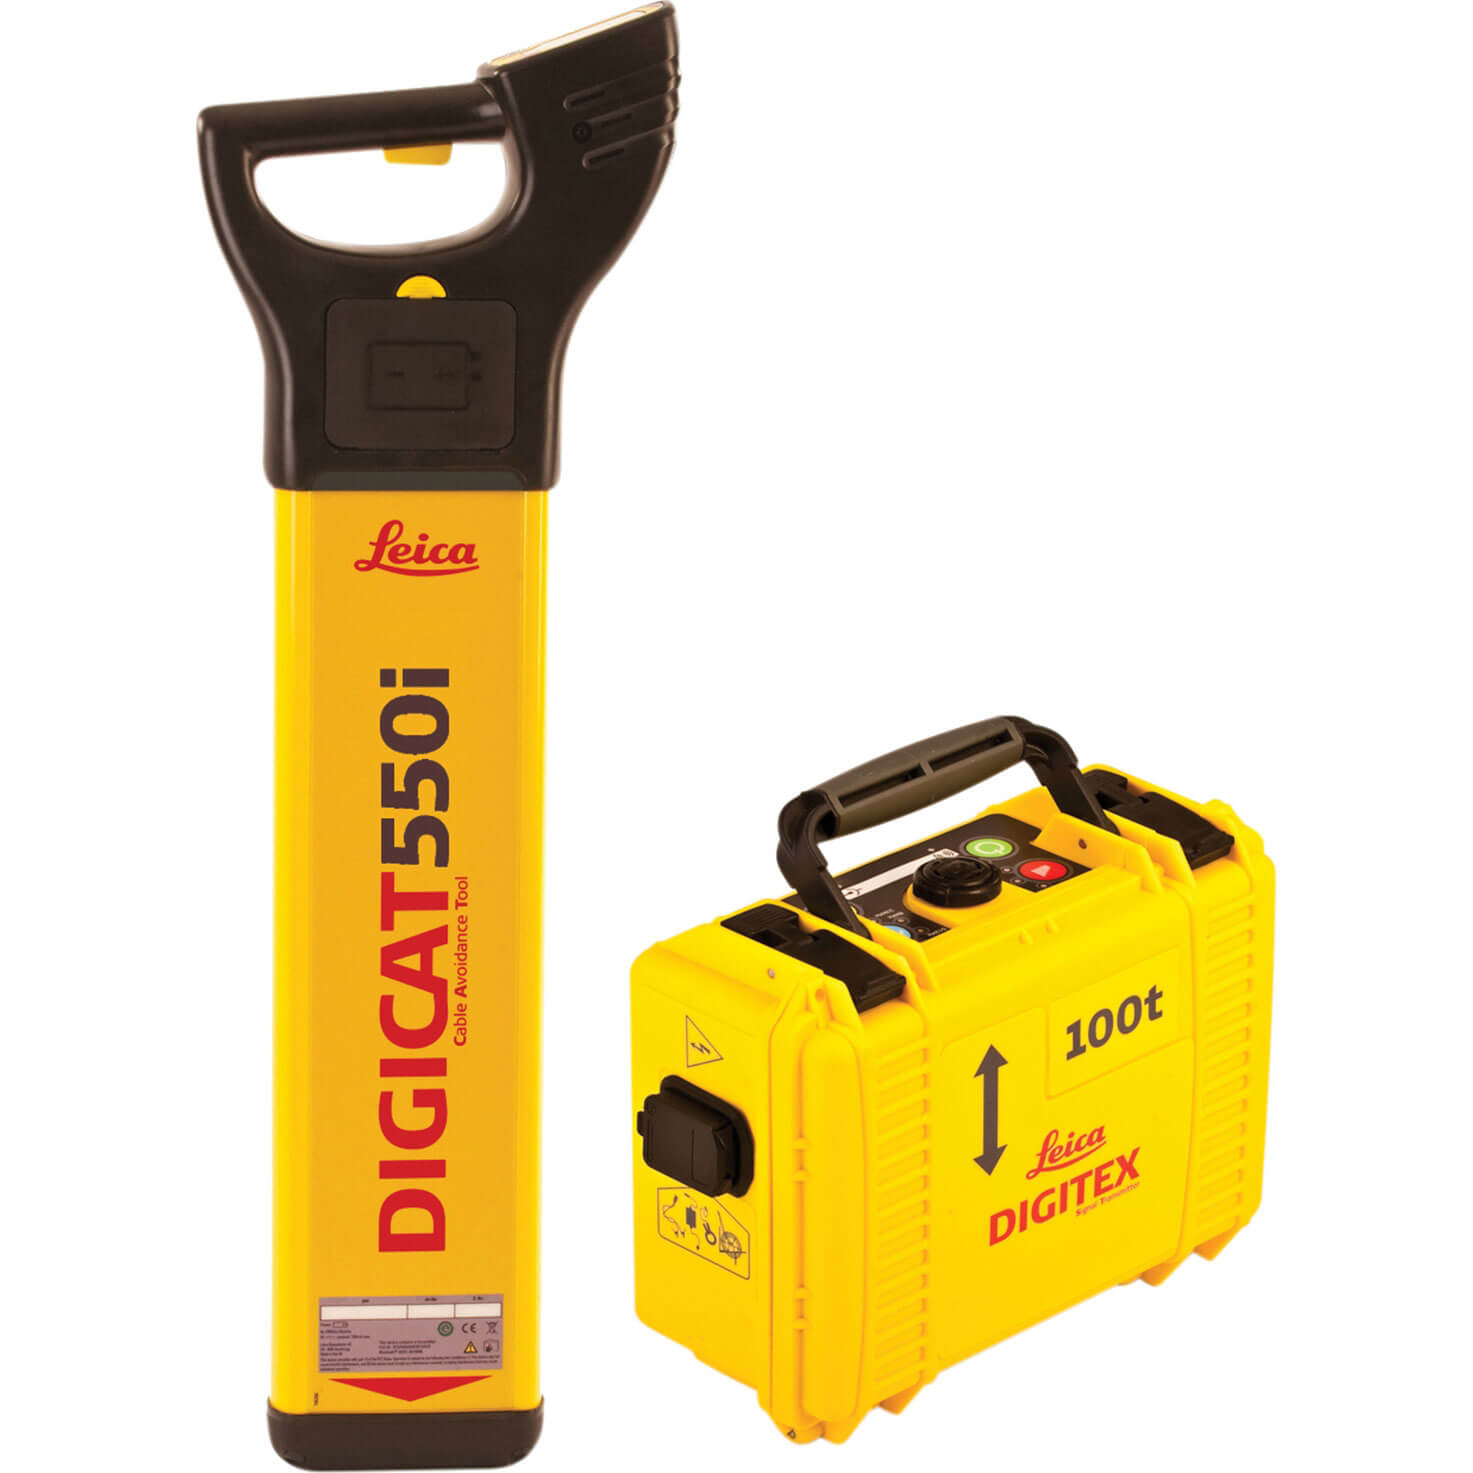 Image of Leica Geosystems Digicat 550L Utility Detector Kit